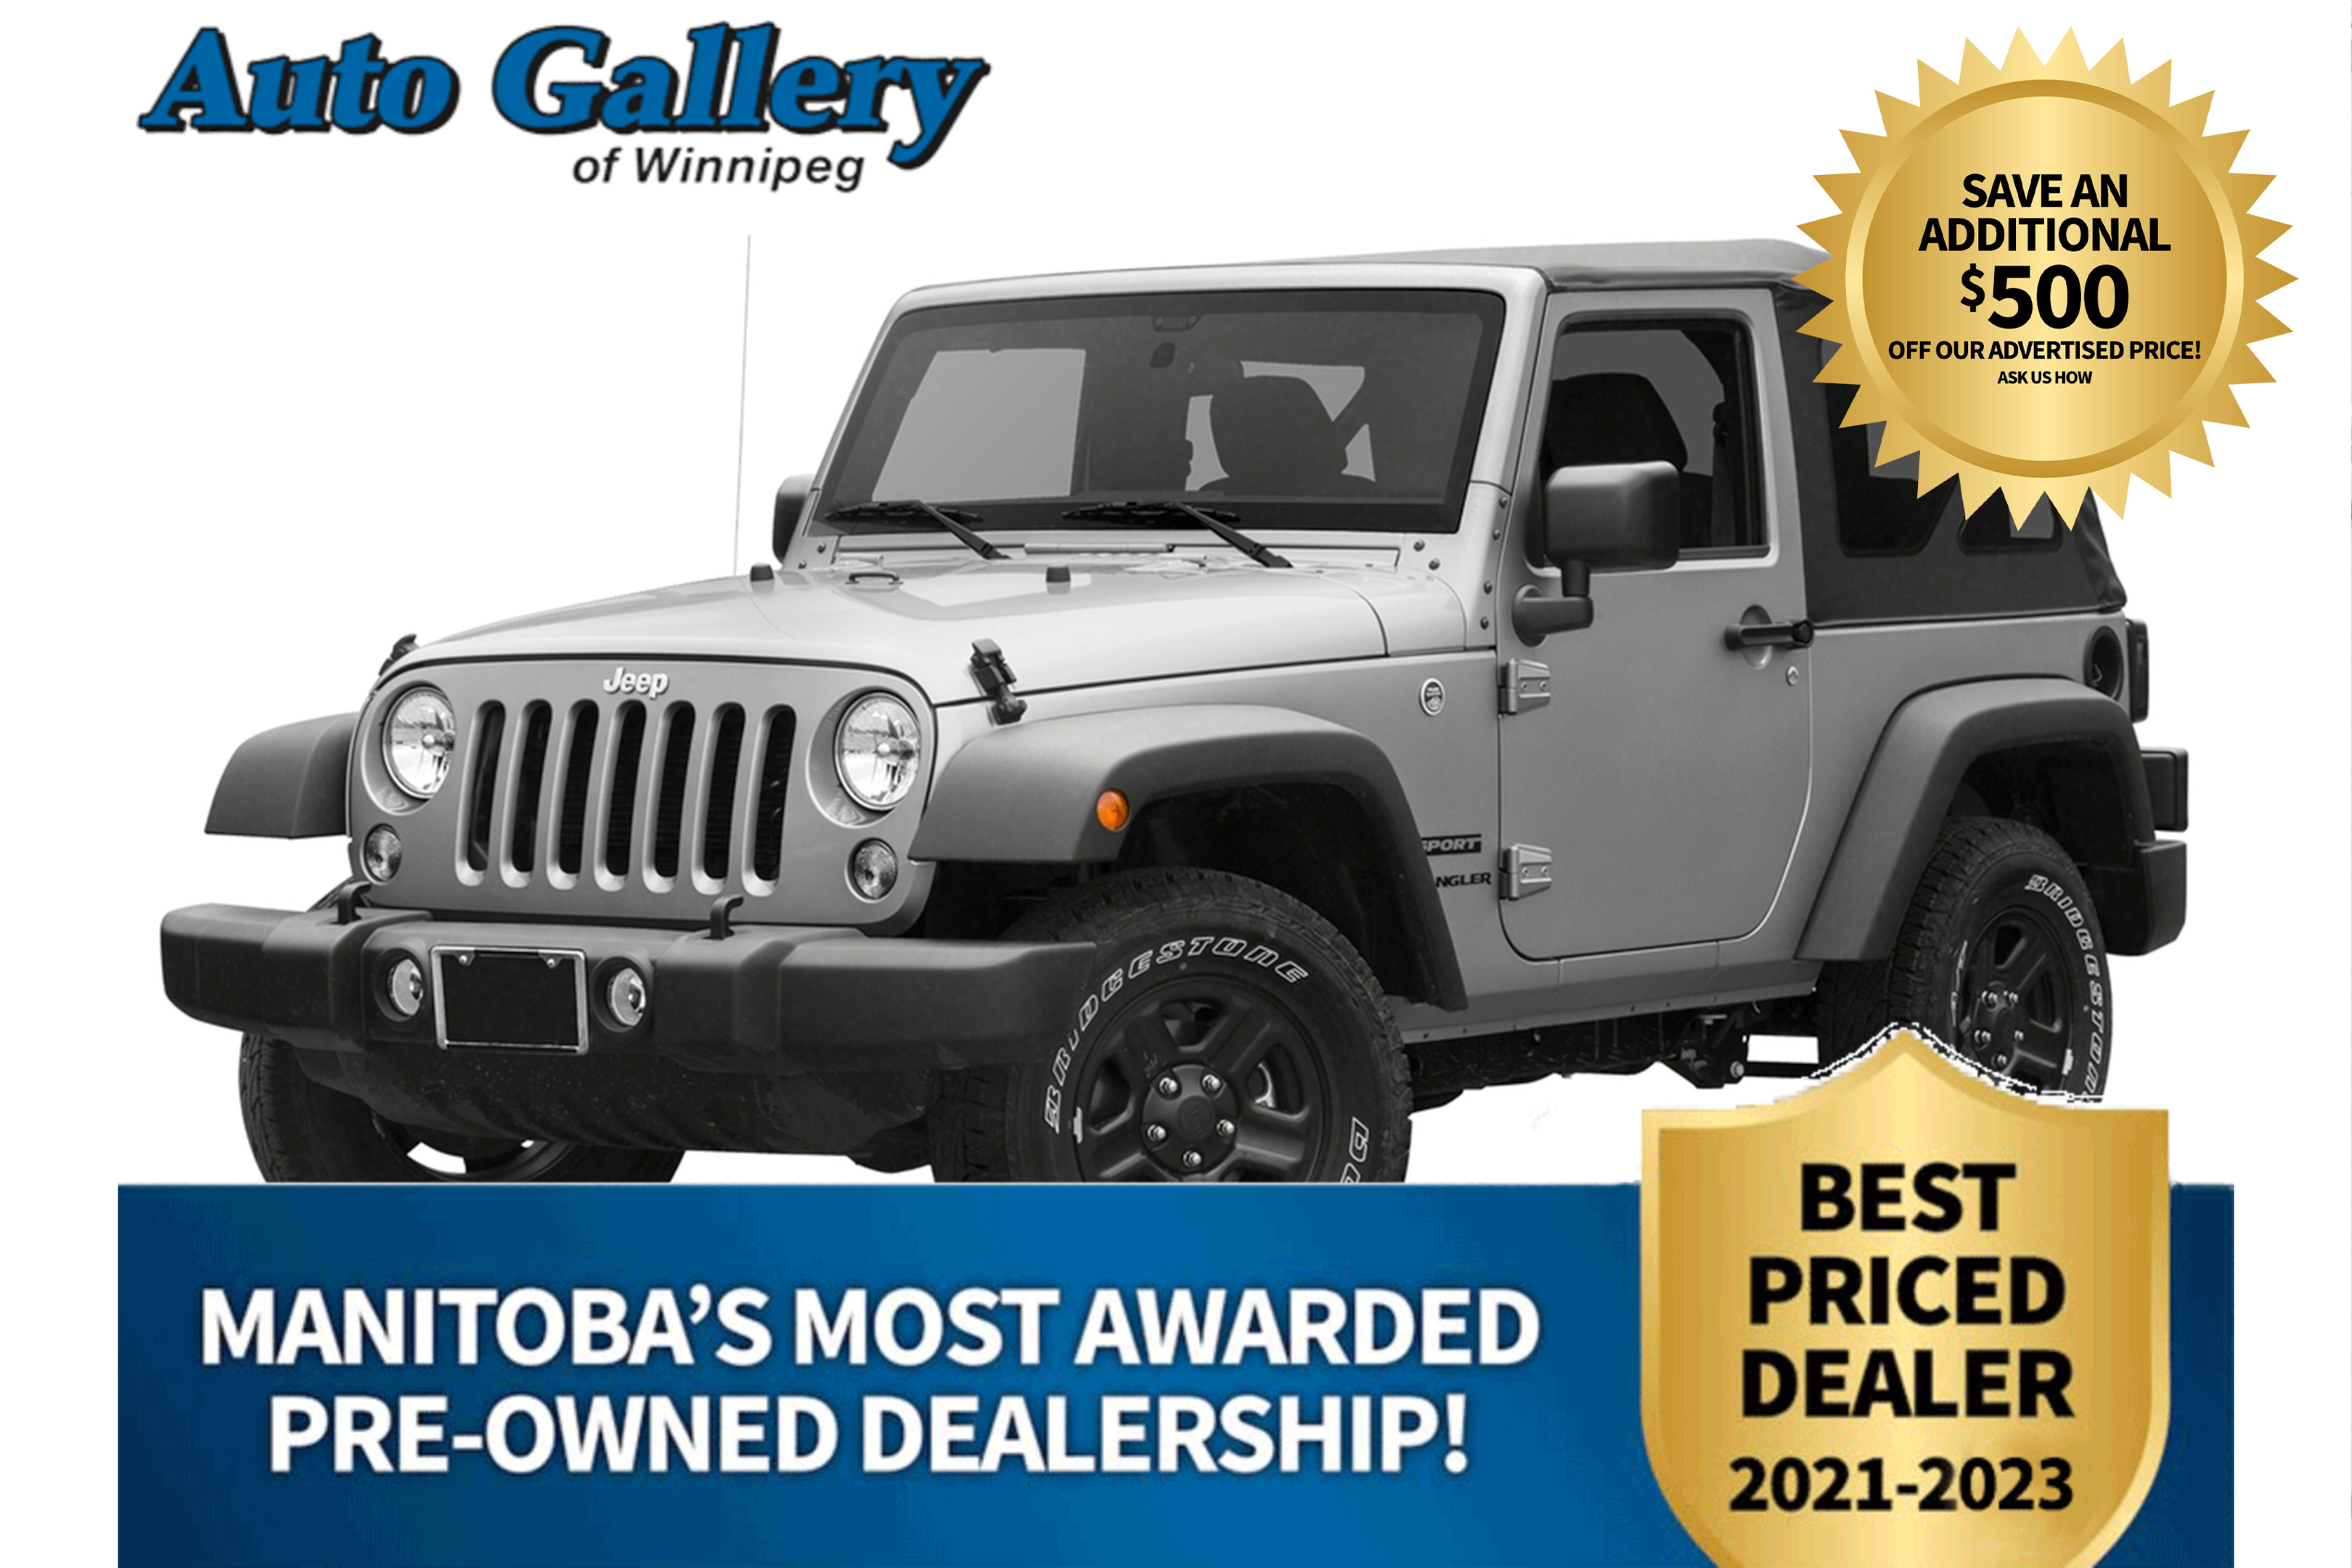 2016 Jeep Wrangler 4WD 2dr Sport, AIR CONDITIONING, MANUAL, RADIO